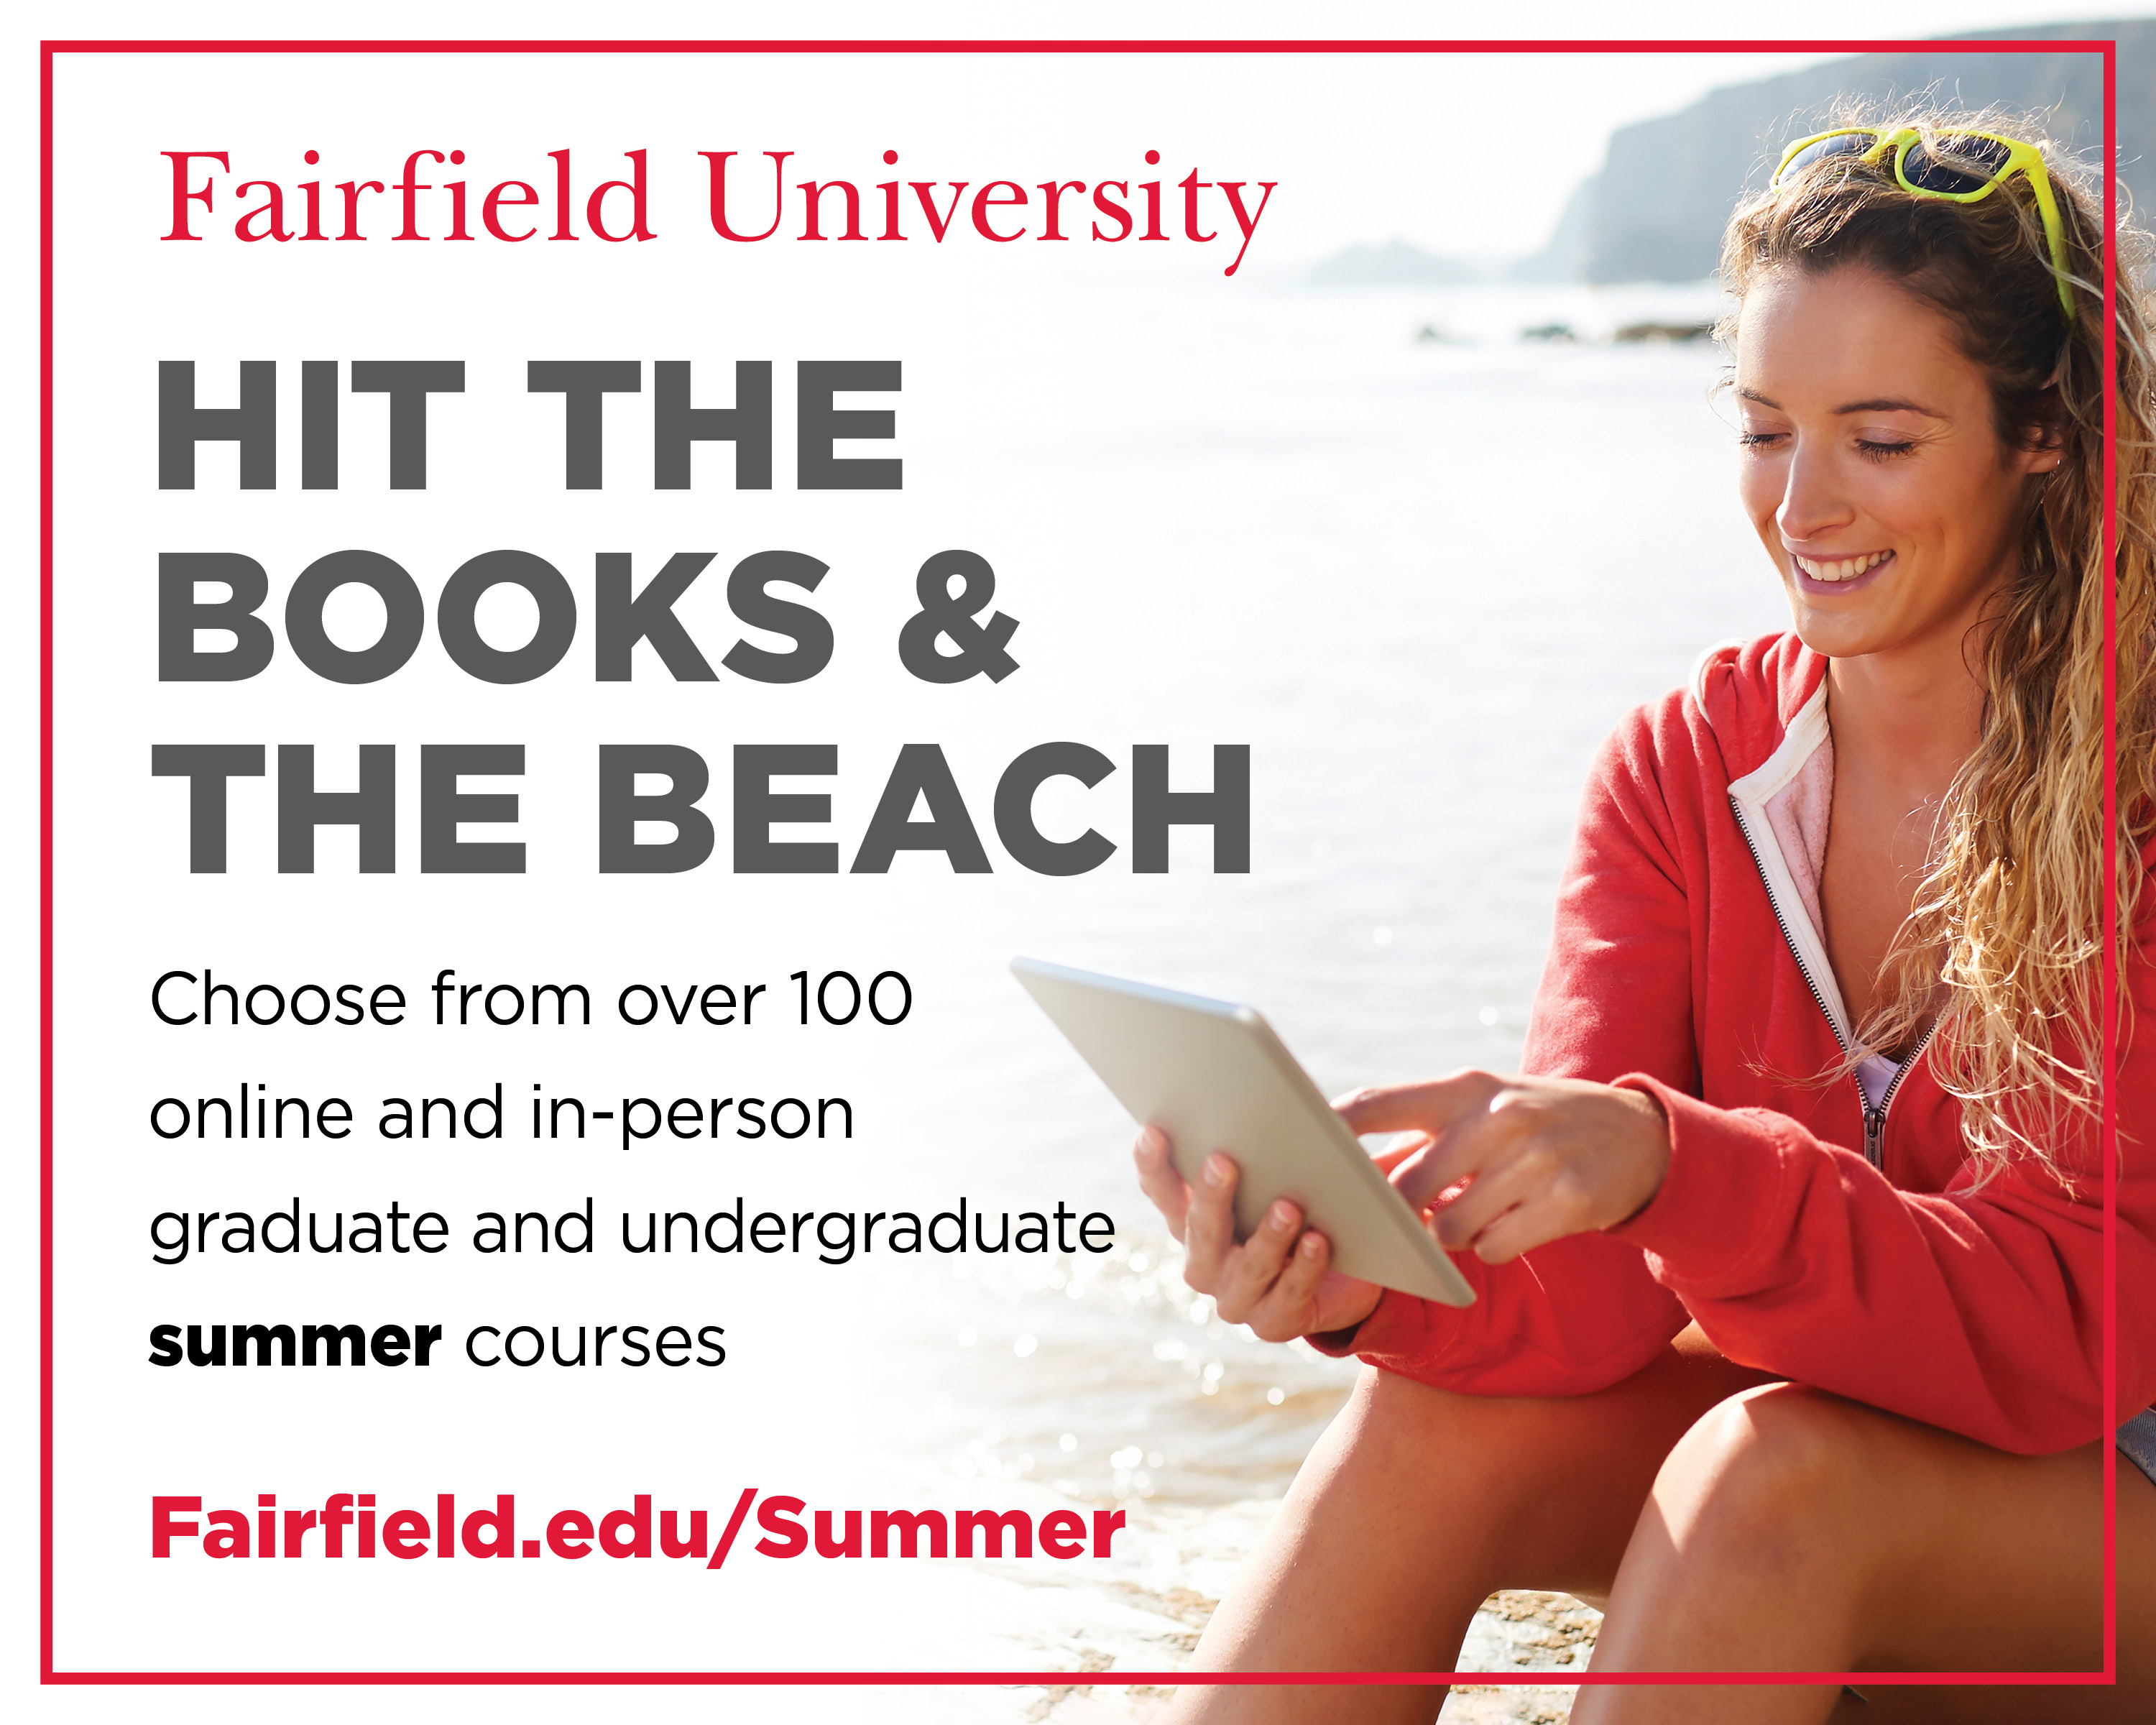 Study at Fairfield this Summer!